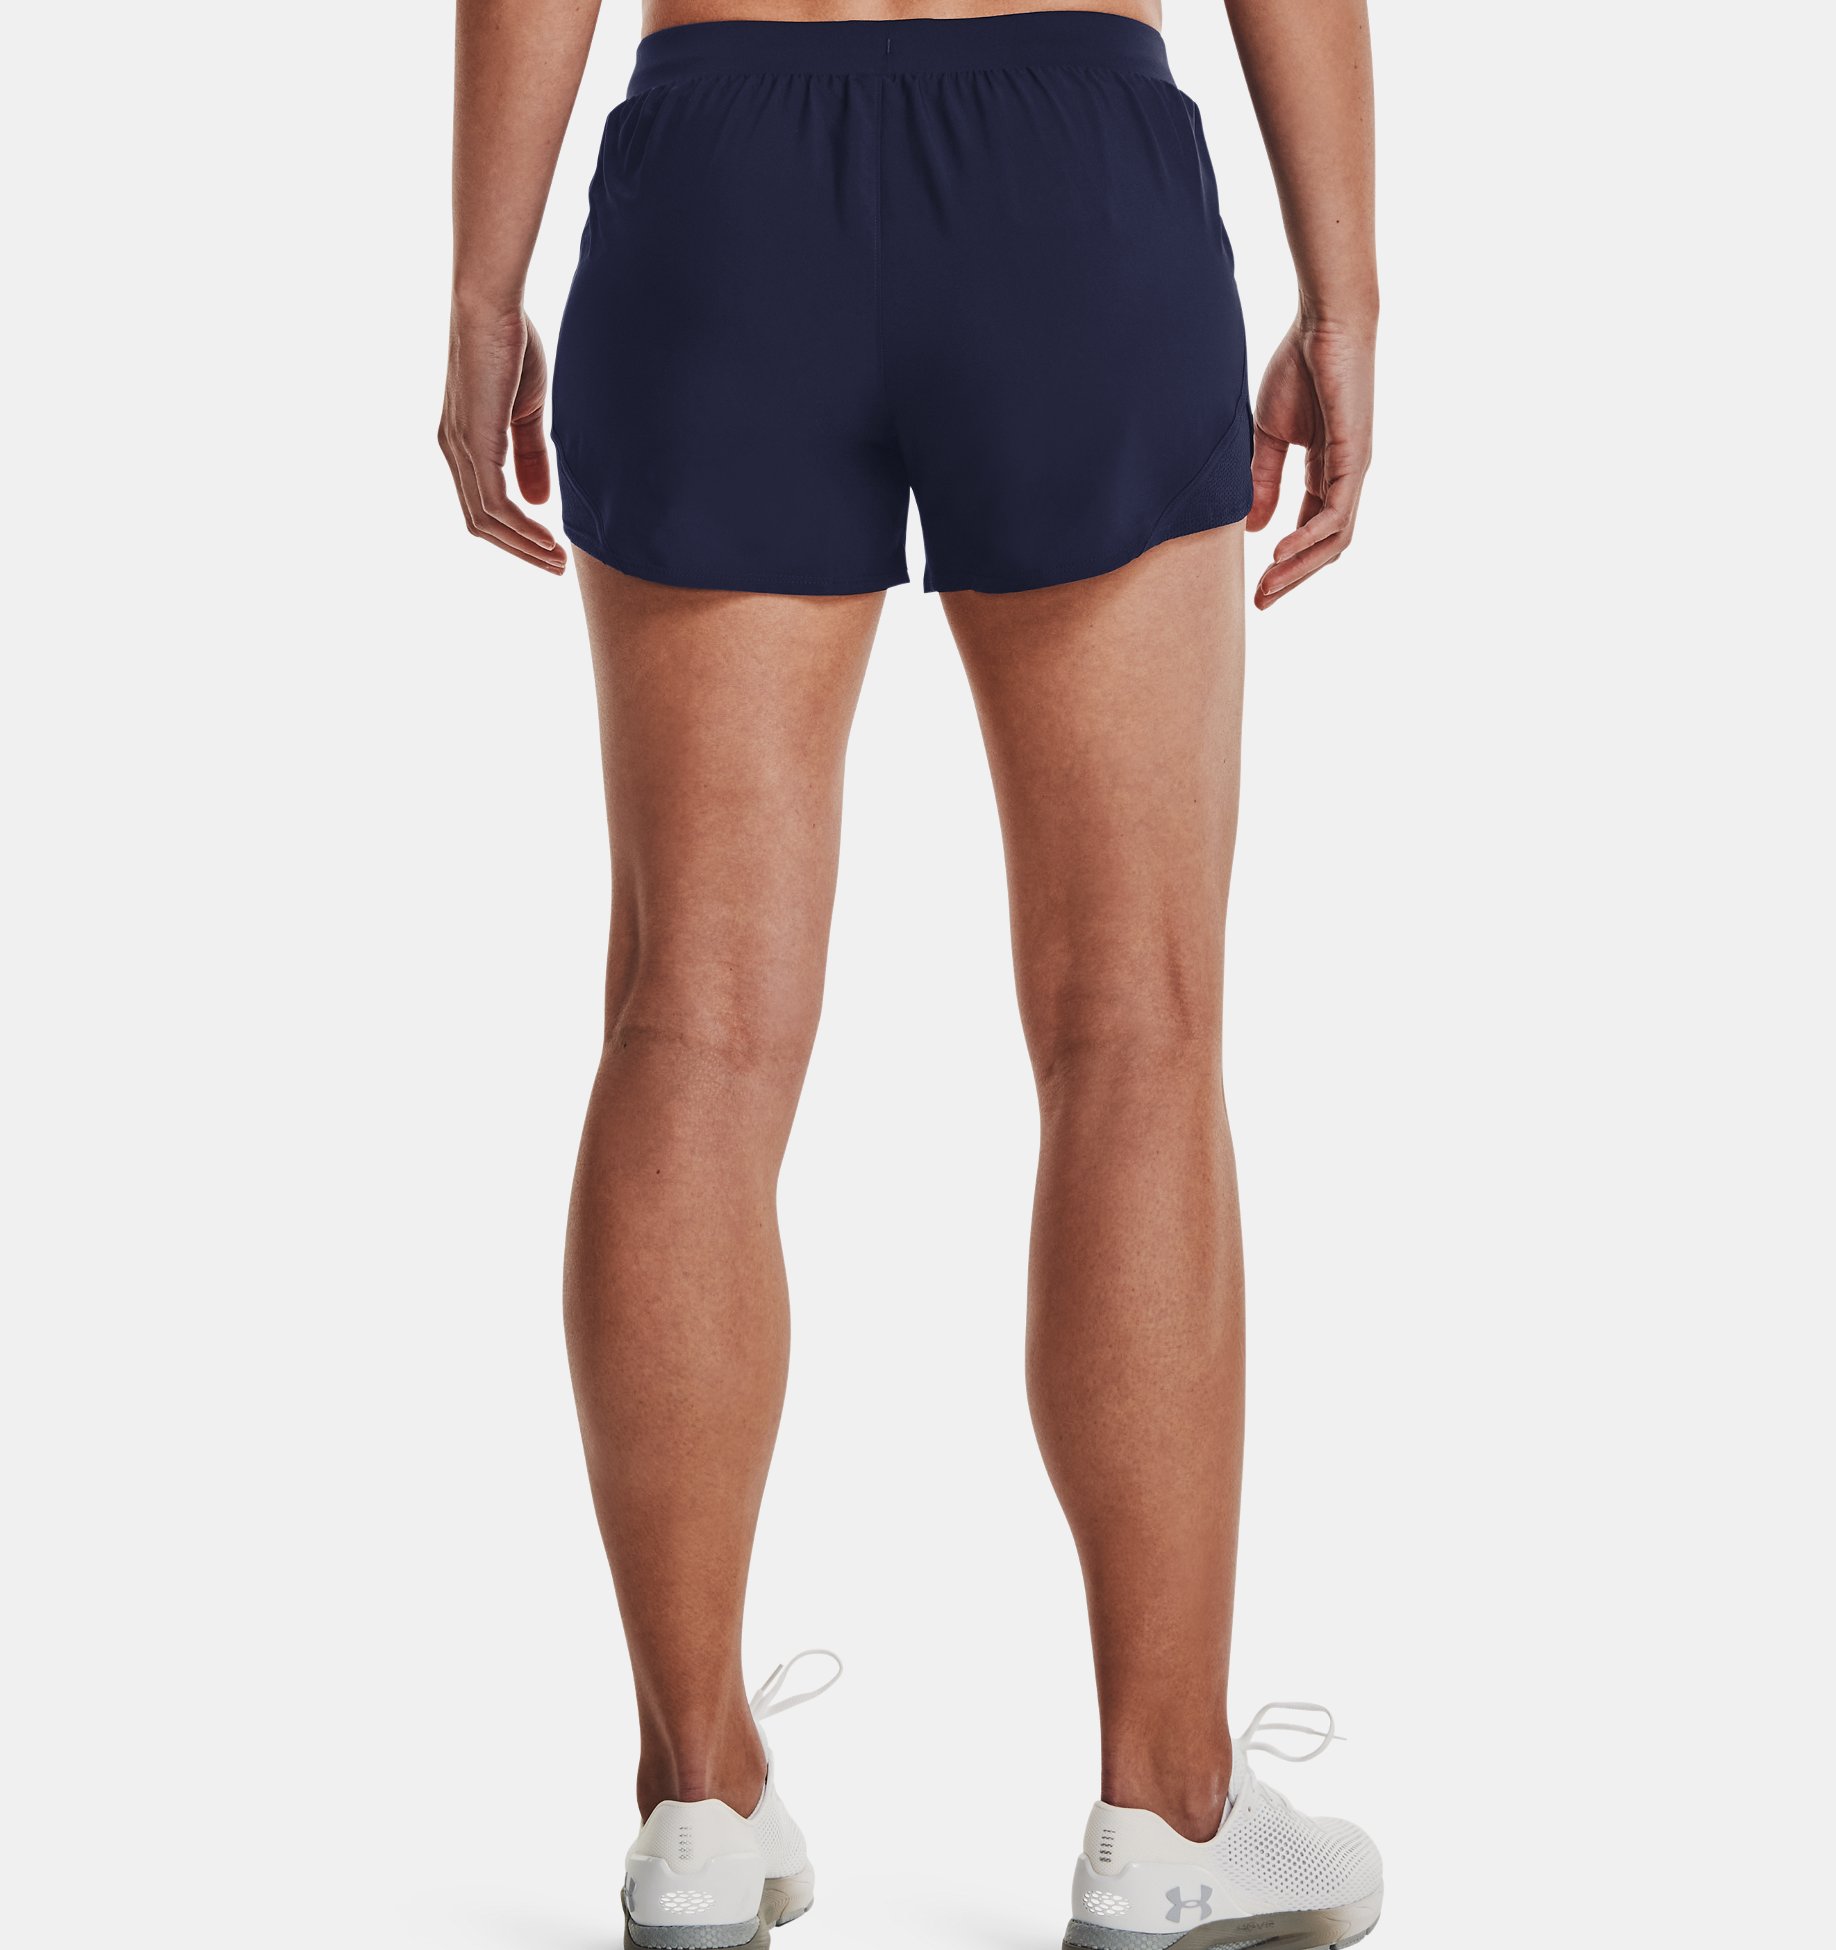 Courte Short de Course Fly by 2.0 Visiter la boutique Under ArmourUnder Armour Fly by 2.0 Running Short Femme 